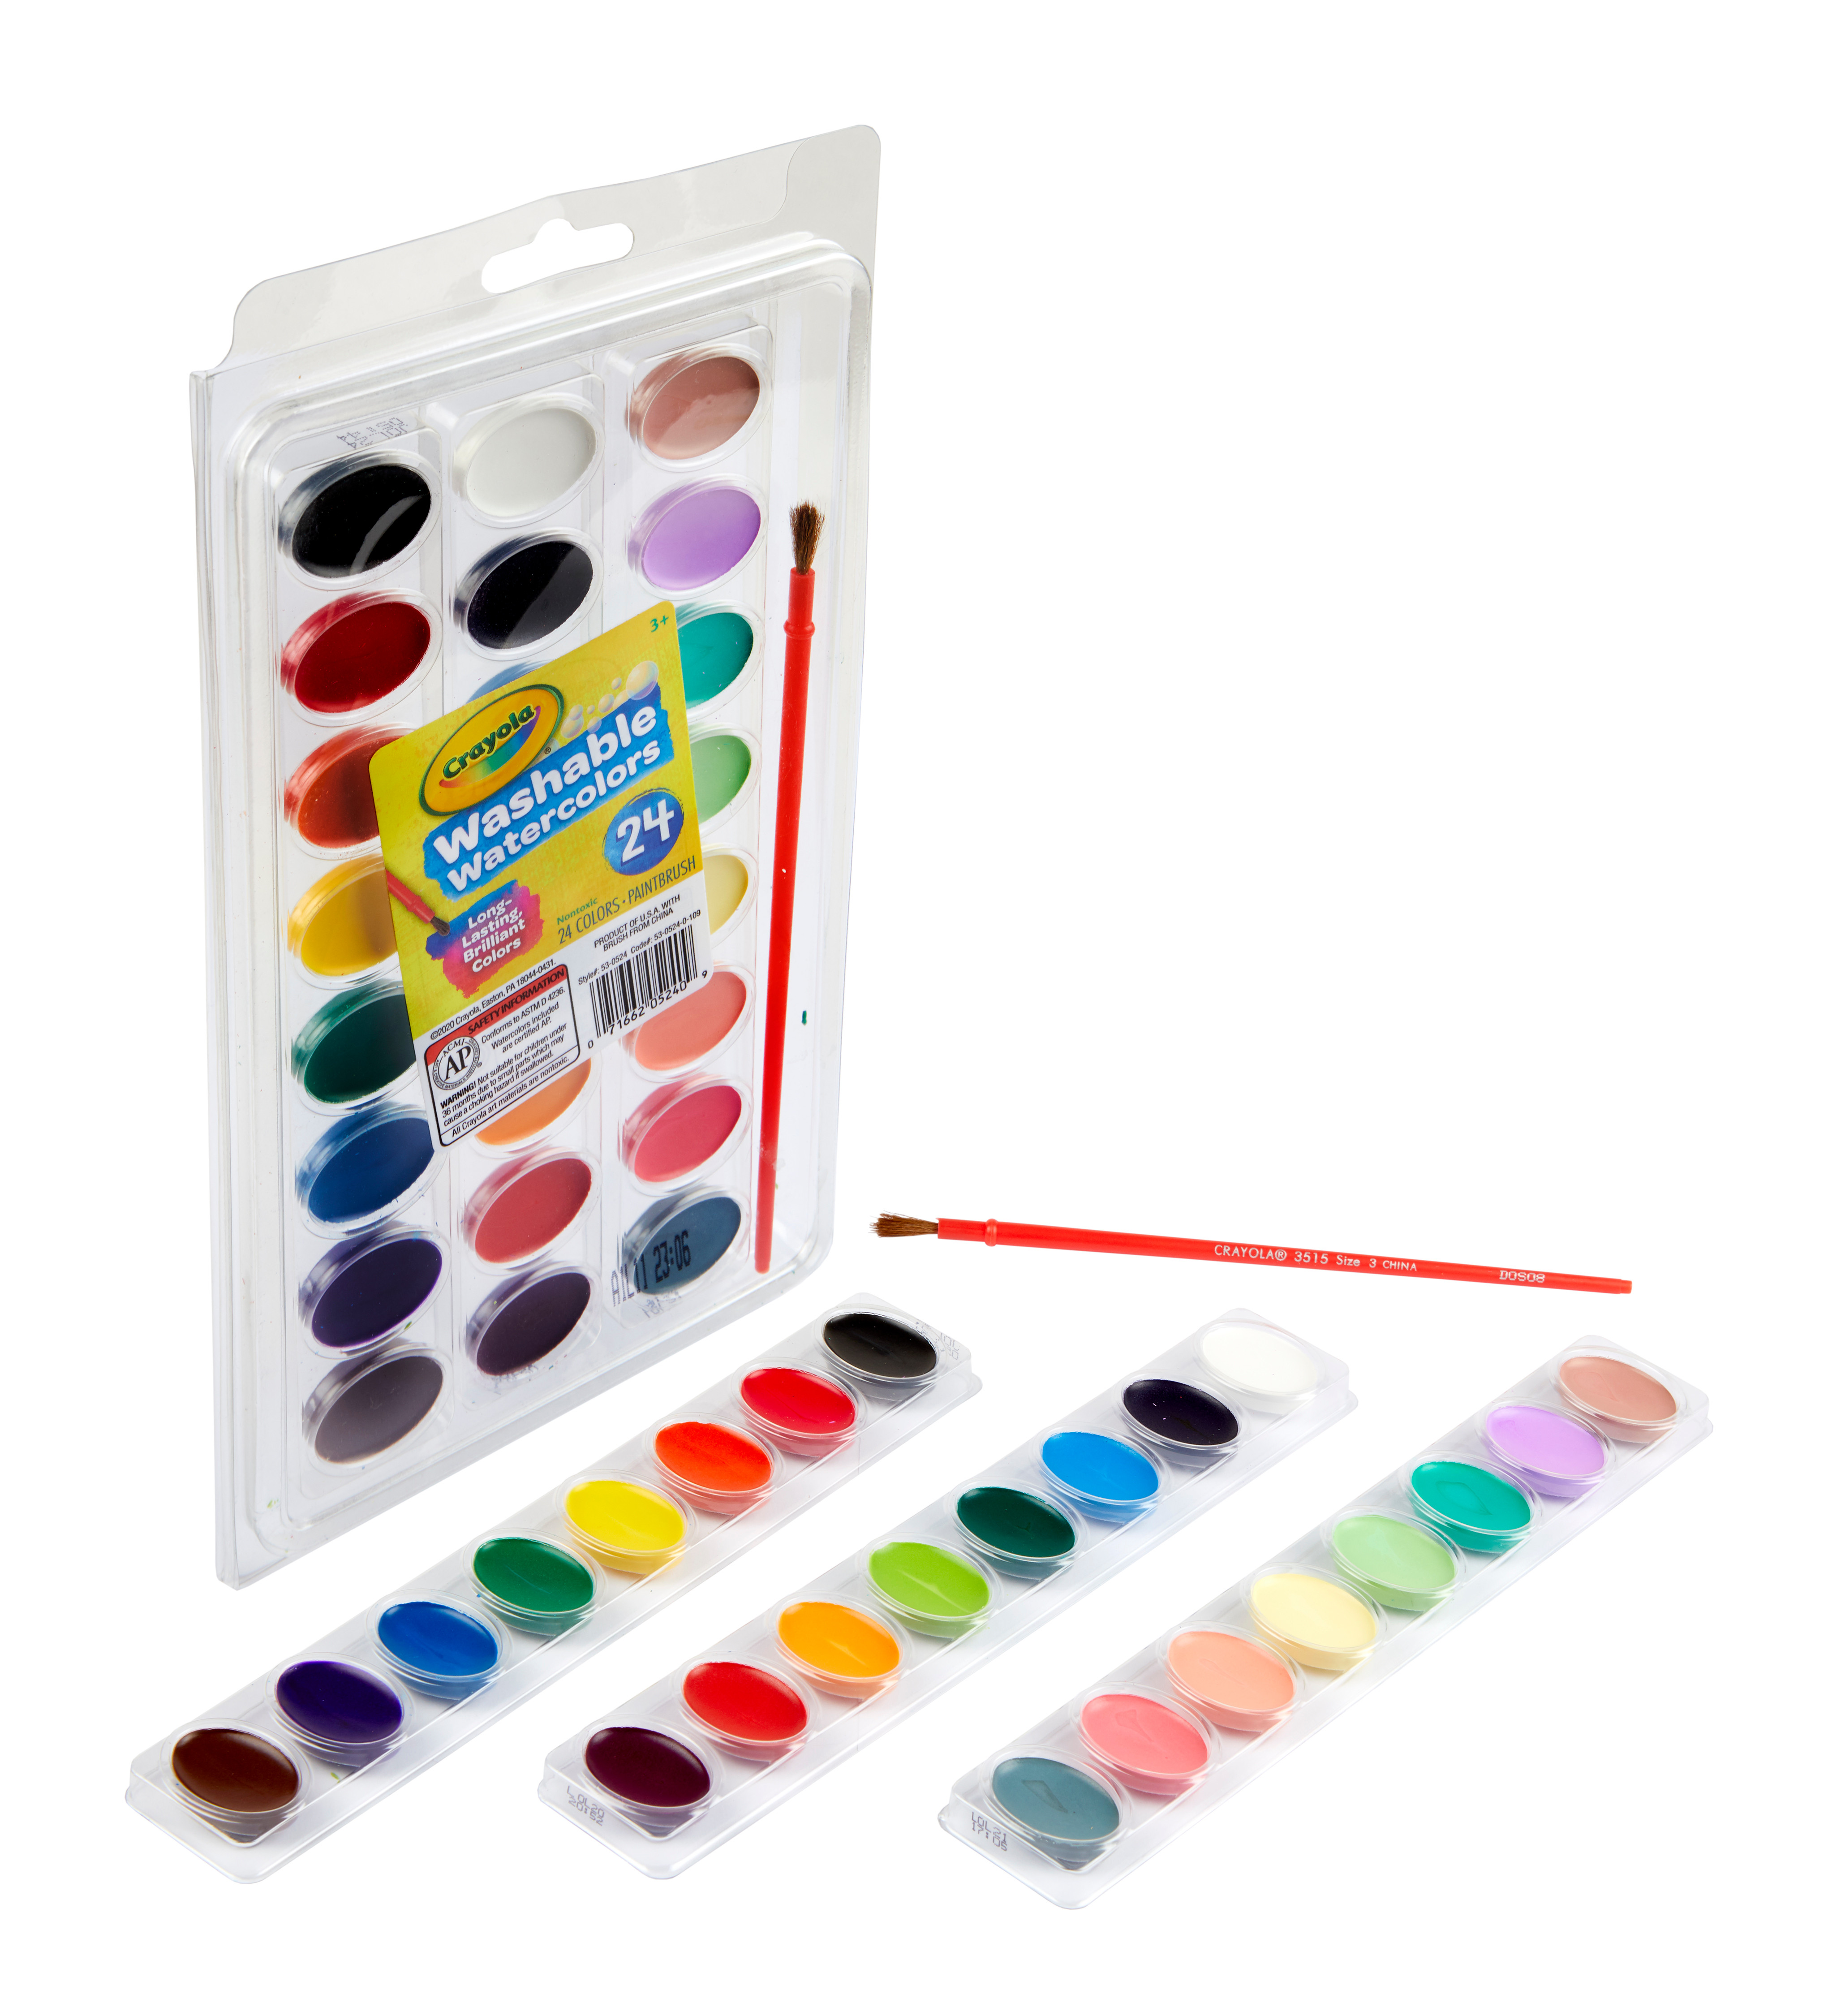 Crayola 24ct Watercolor Paints with Brush - image 7 of 8